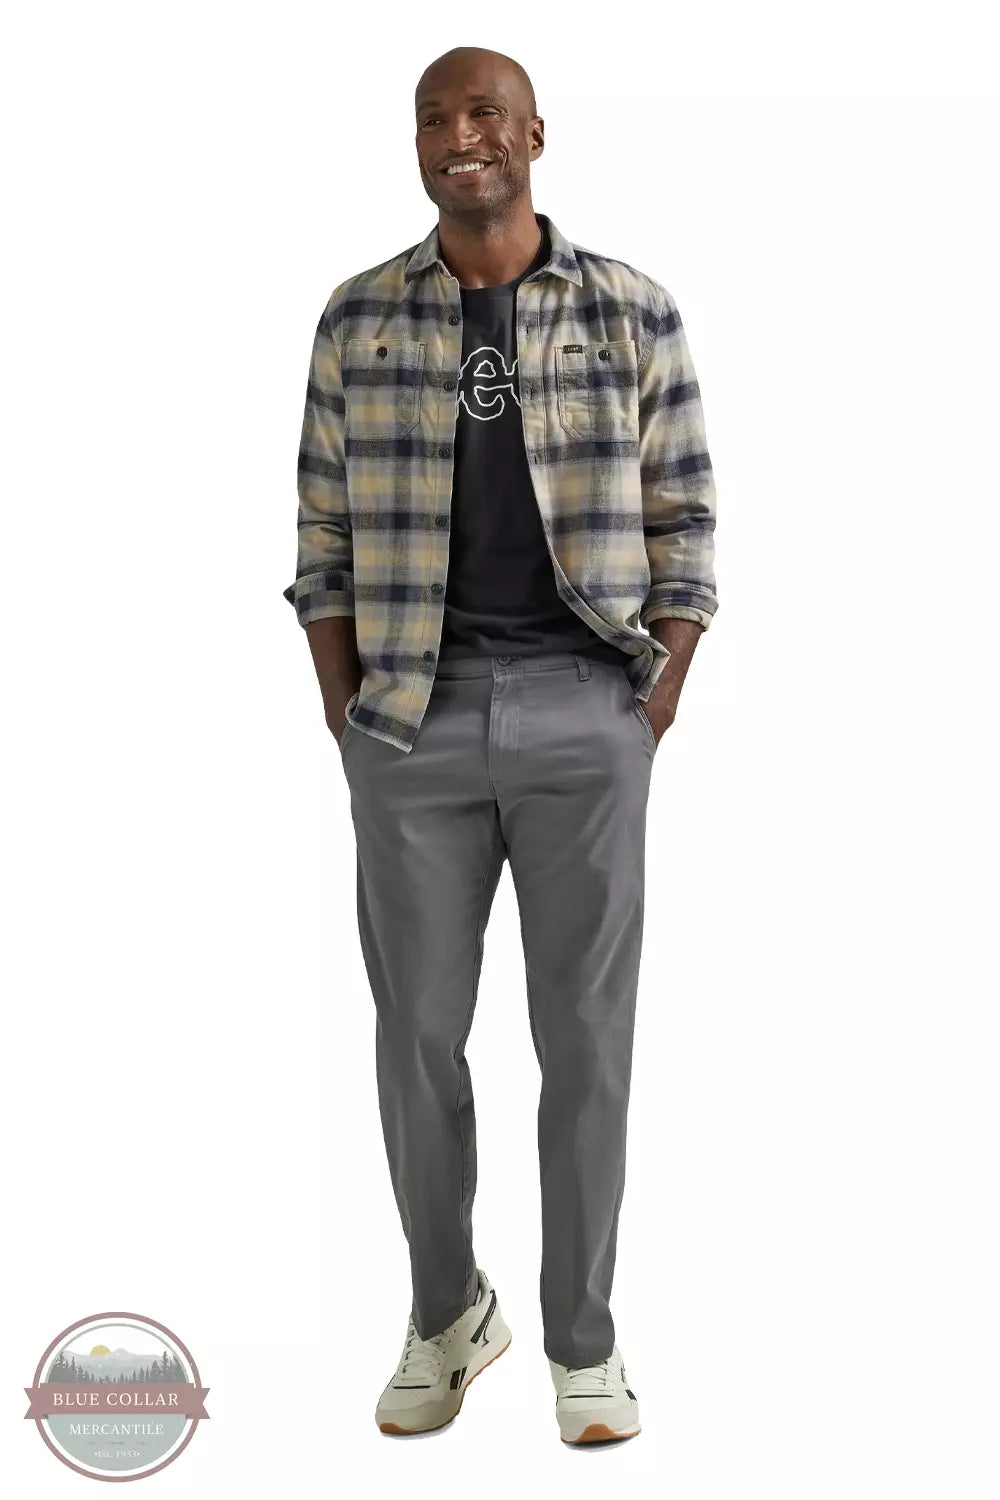 Lee 112339801 Extreme Motion Flannel Button Down Long Sleeve Shirt in Gray Plaid Full View